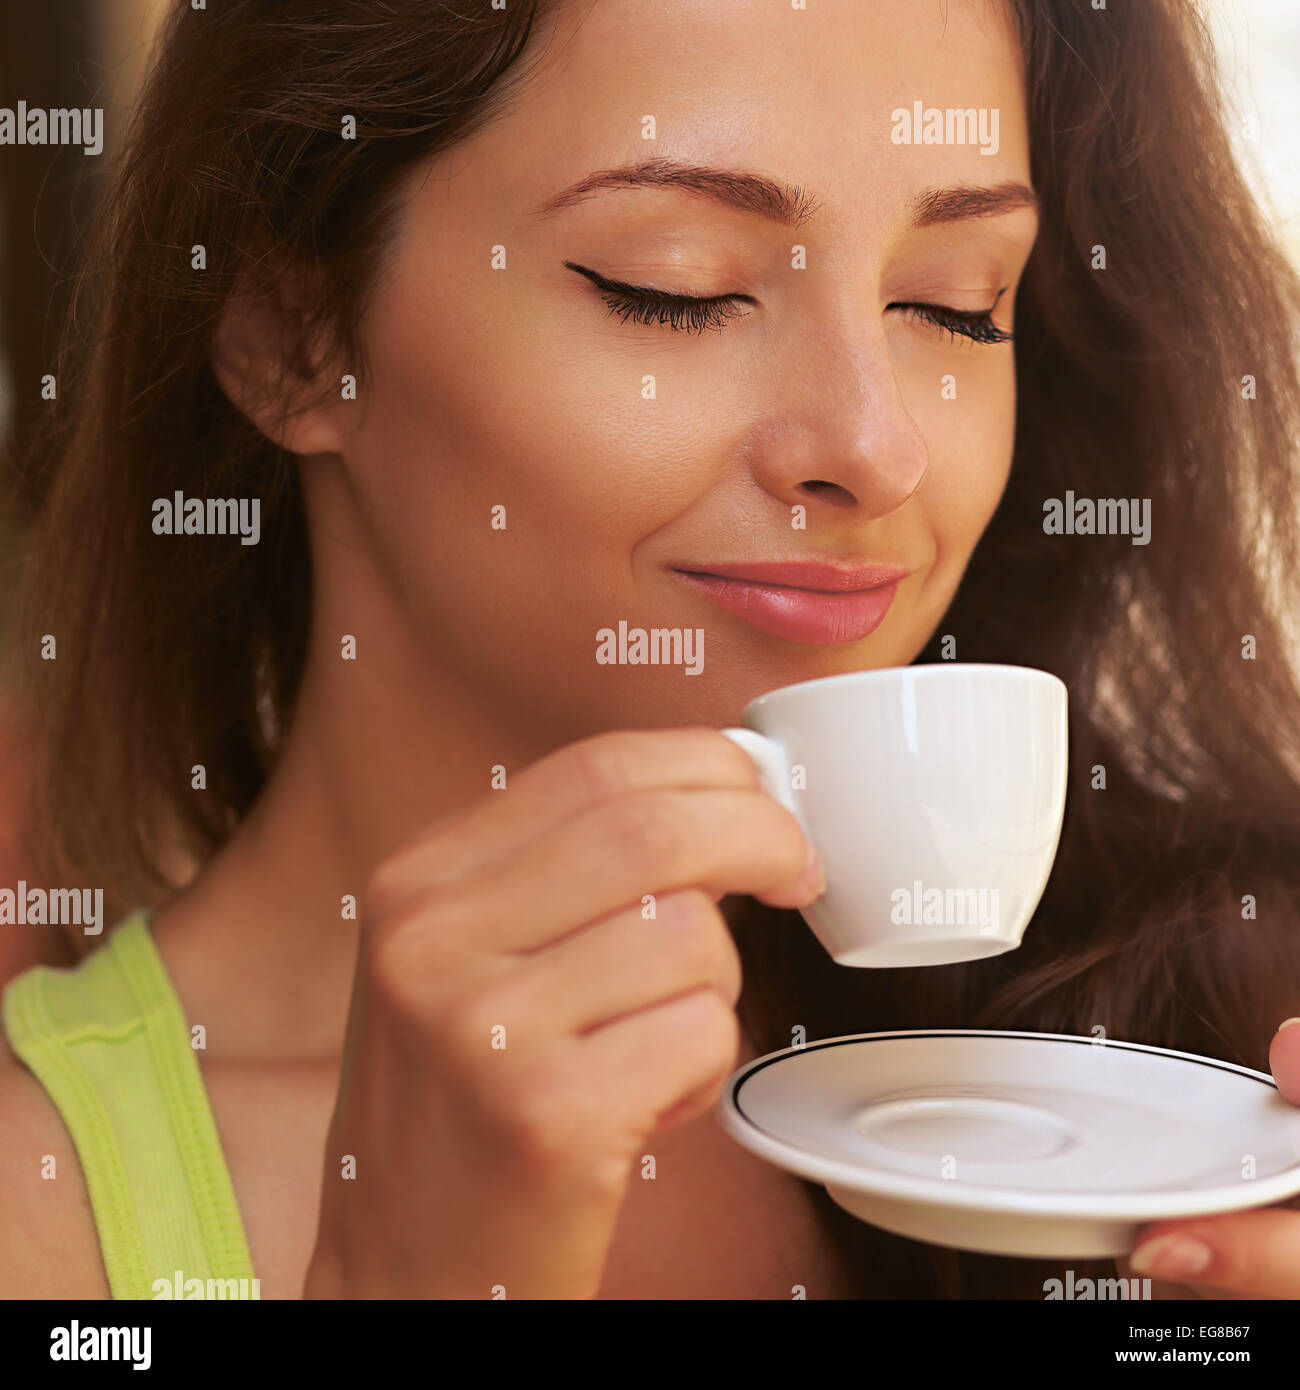 Beautiful Enjoying Woman Drinking Coffee From Cup Outdoors With Closed